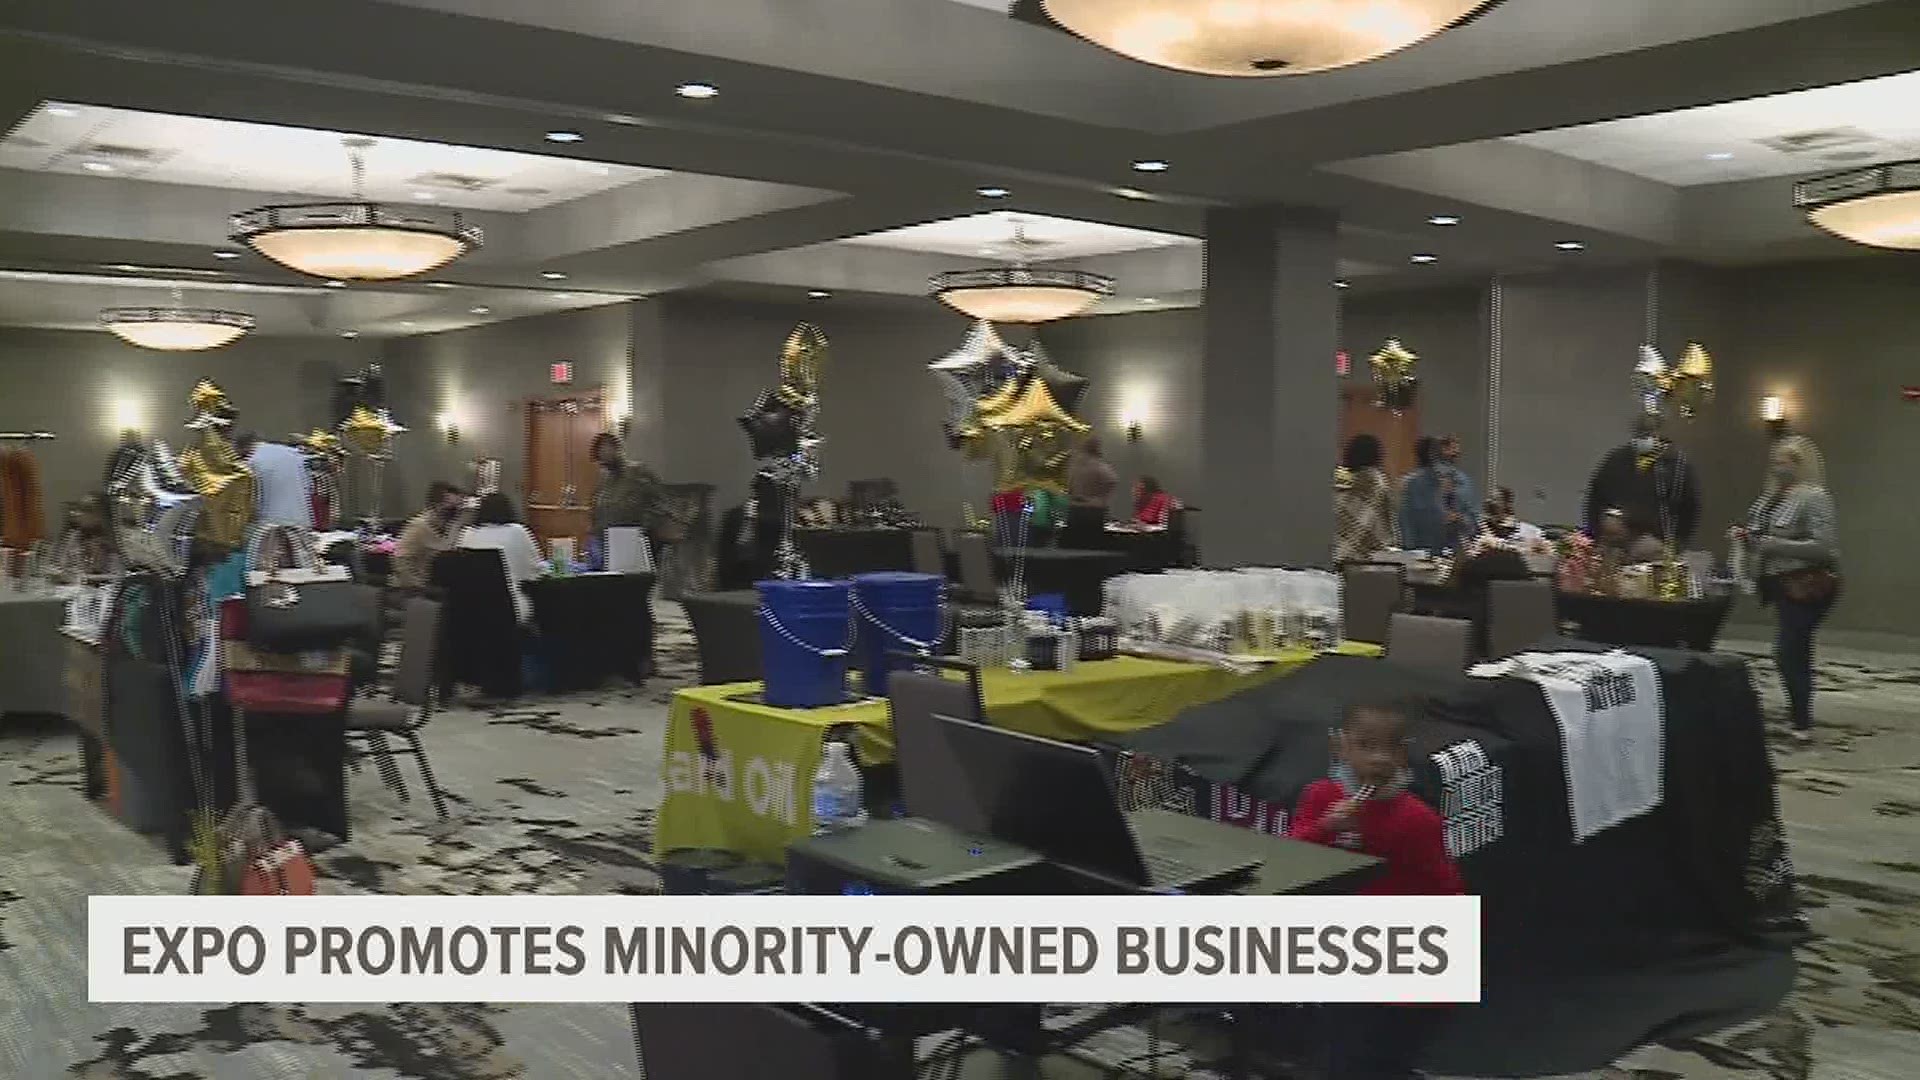 The Urban Revolution Marketing & Branding Business has hosted an expo to promote minority-owned businesses and their services to the Harrisburg community.